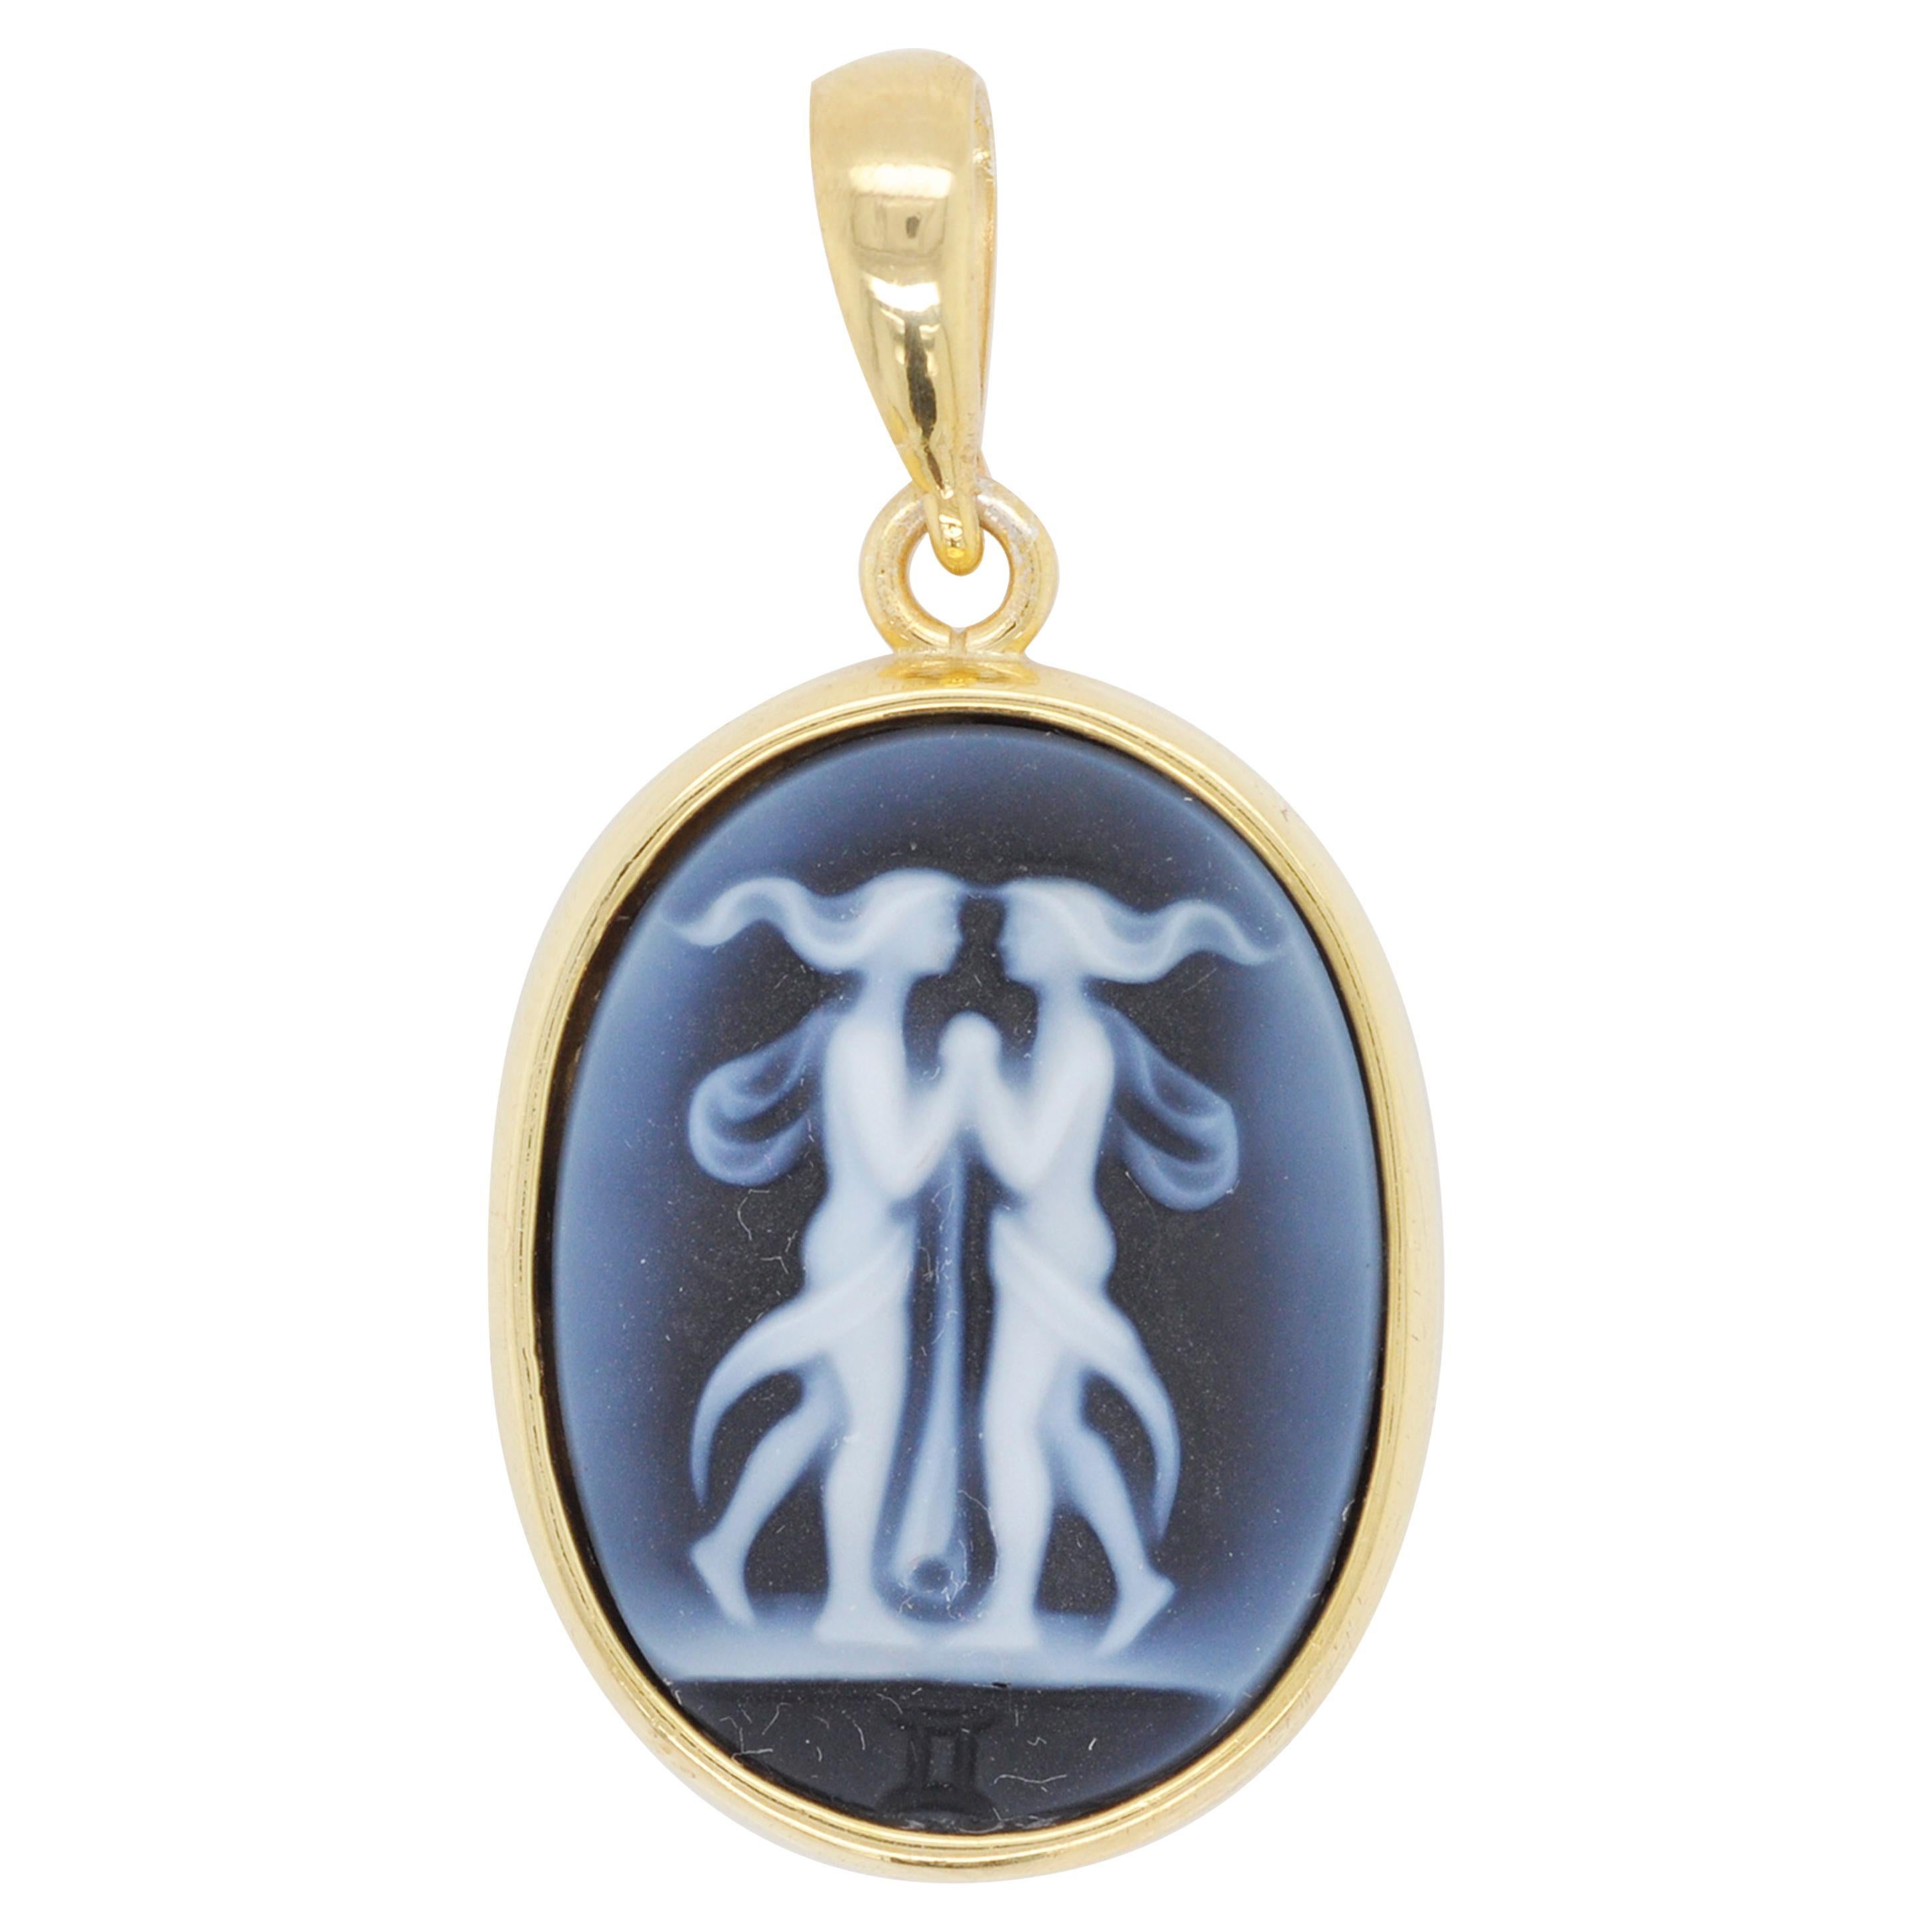 Hand-Carved Gemini Zodiac Agate Cameo 925 Sterling Silver Pendant Necklace